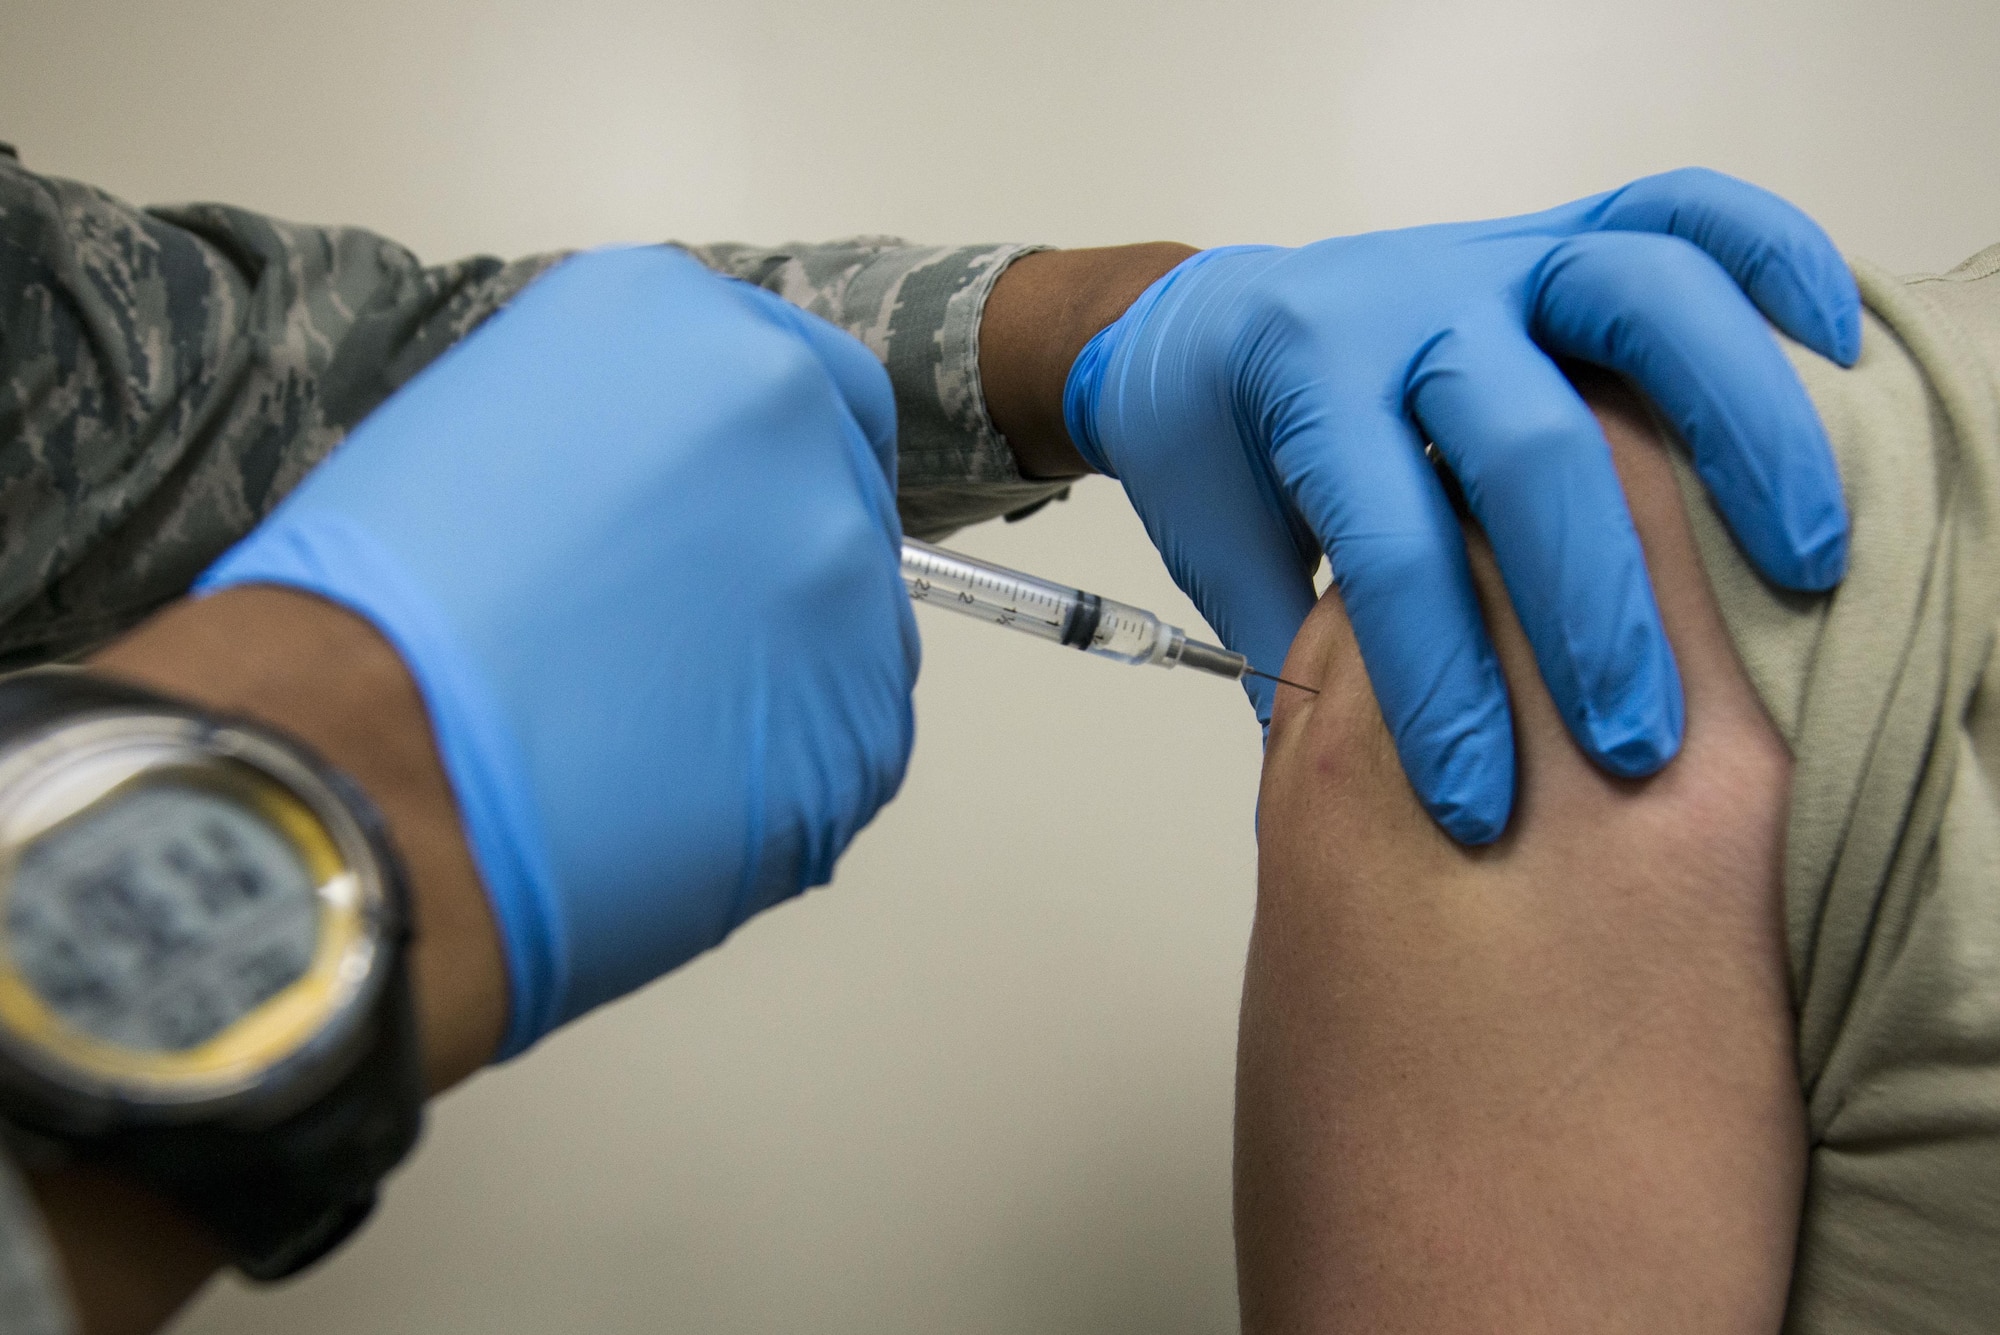 U.S. Air Force Senior Airman Tamika Bradley, 20th Medical Operations Squadron allergy and immunizations technician, injects a vaccine into a patient at Shaw Air Force Base, South Carolina, Oct. 23, 2017.